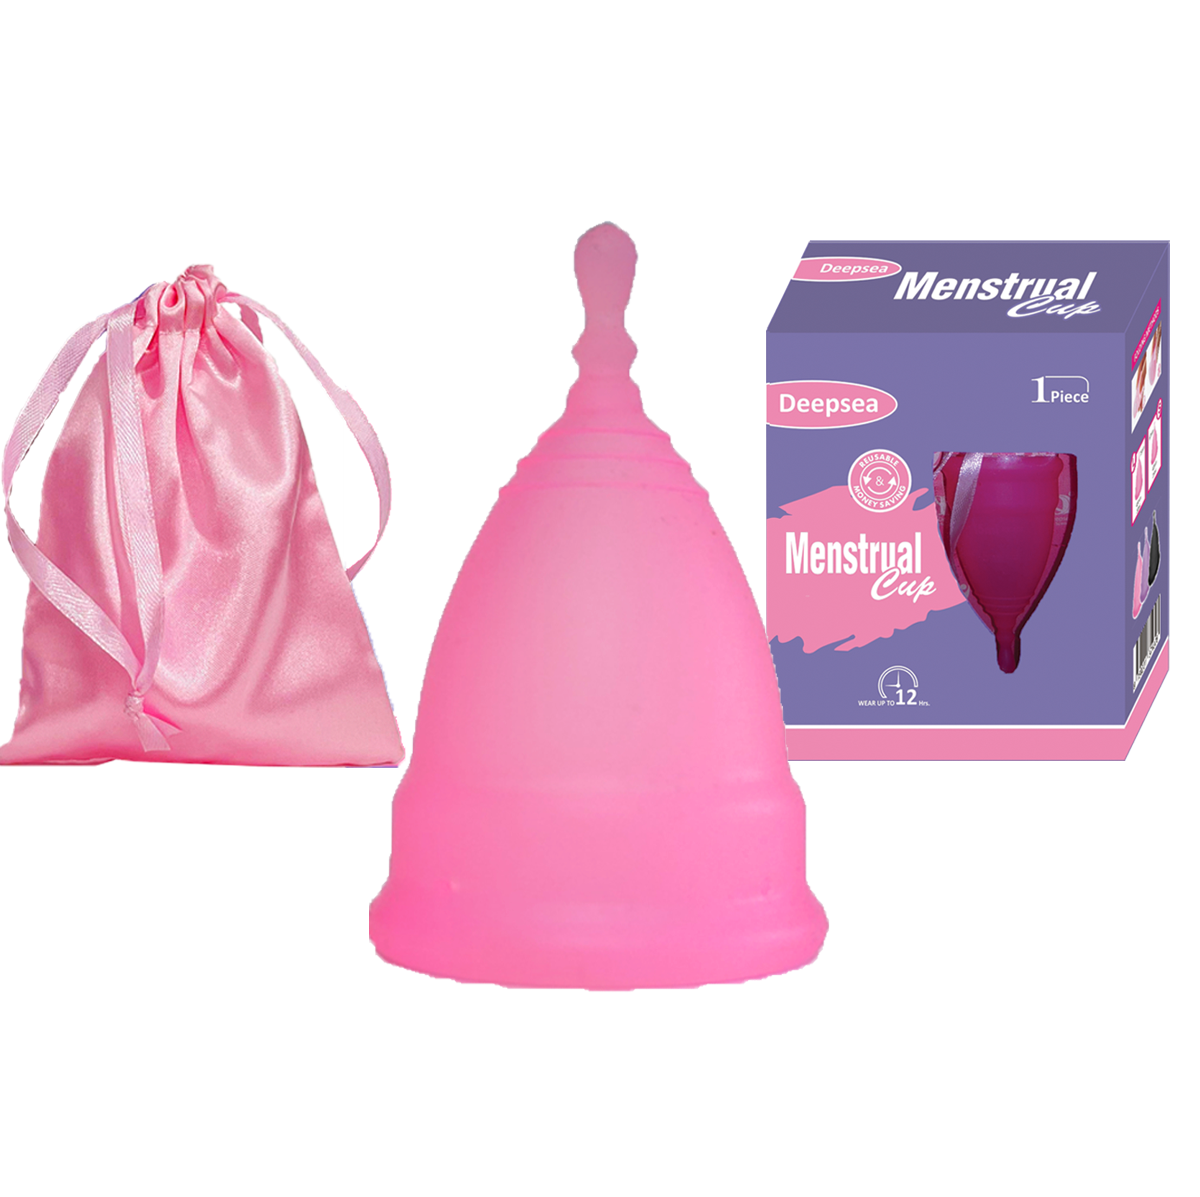 Deepsea Menstrual Cup / Period Cup – Large & Small - Premium Quality, BPA Free 100% Medical Grade Silicone